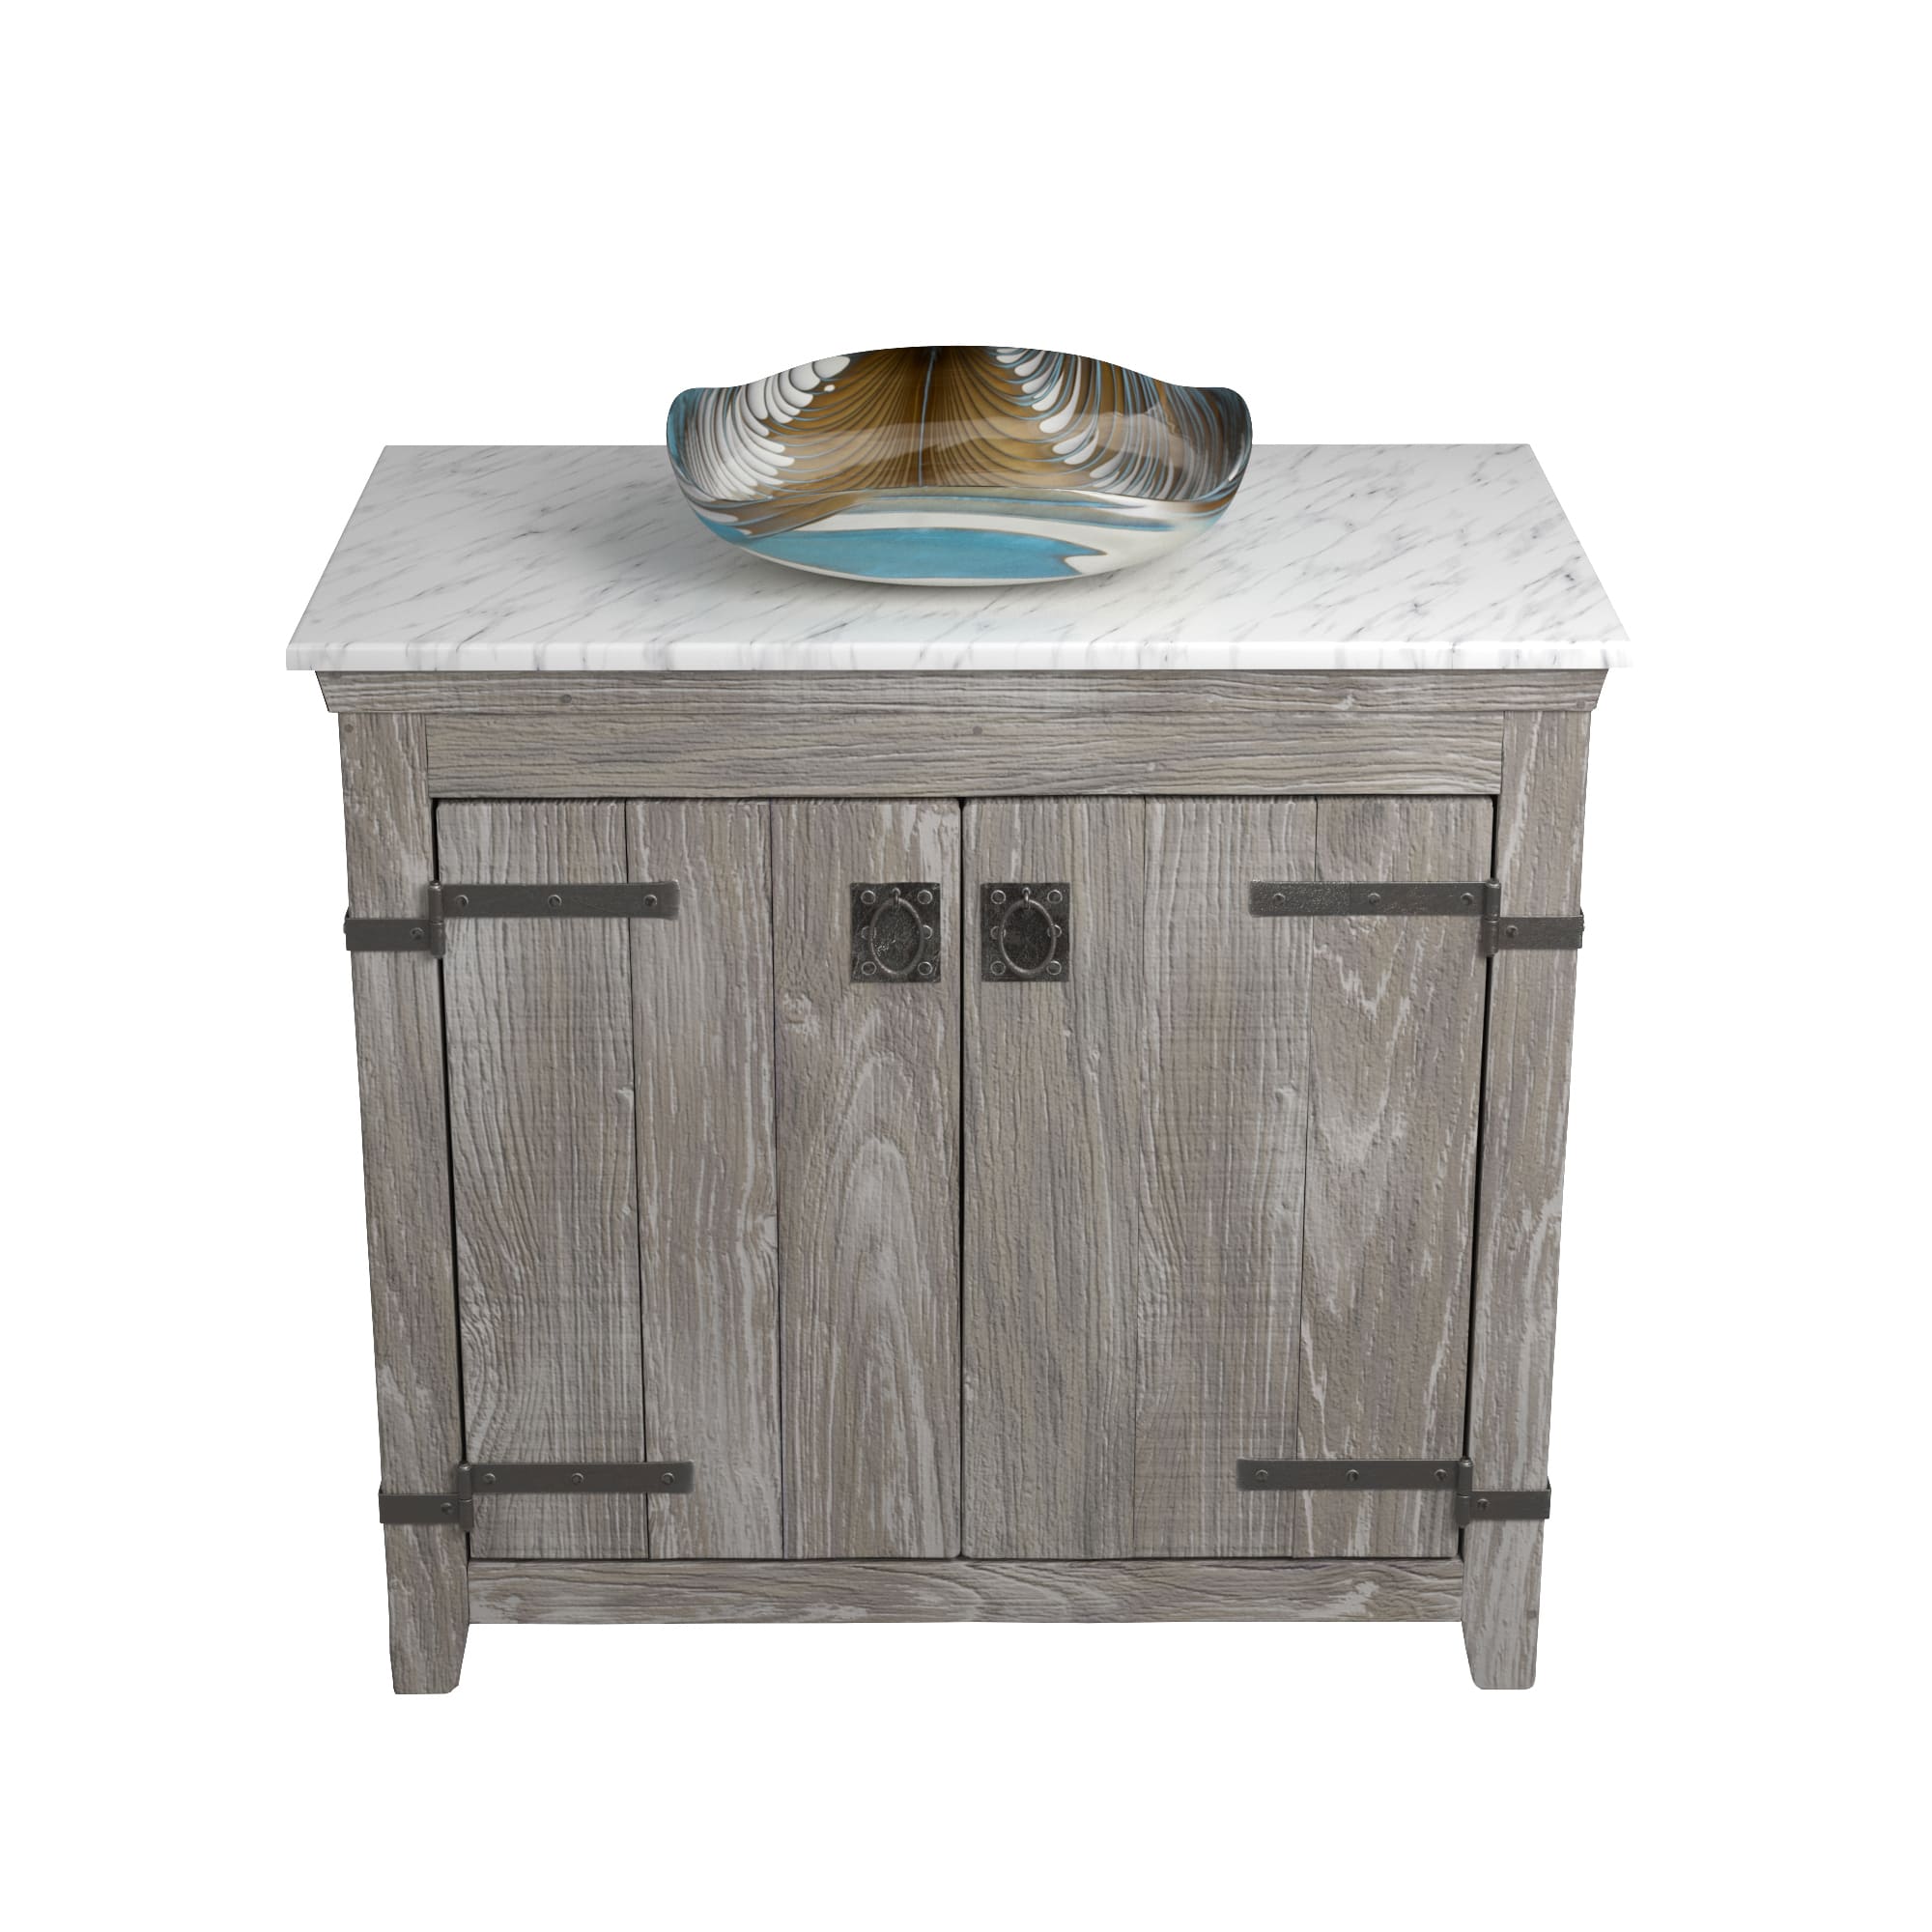 Native Trails 36" Americana Vanity in Driftwood with Carrara Marble Top and Lido in Shoreline, Single Faucet Hole, BND36-VB-CT-MG-031